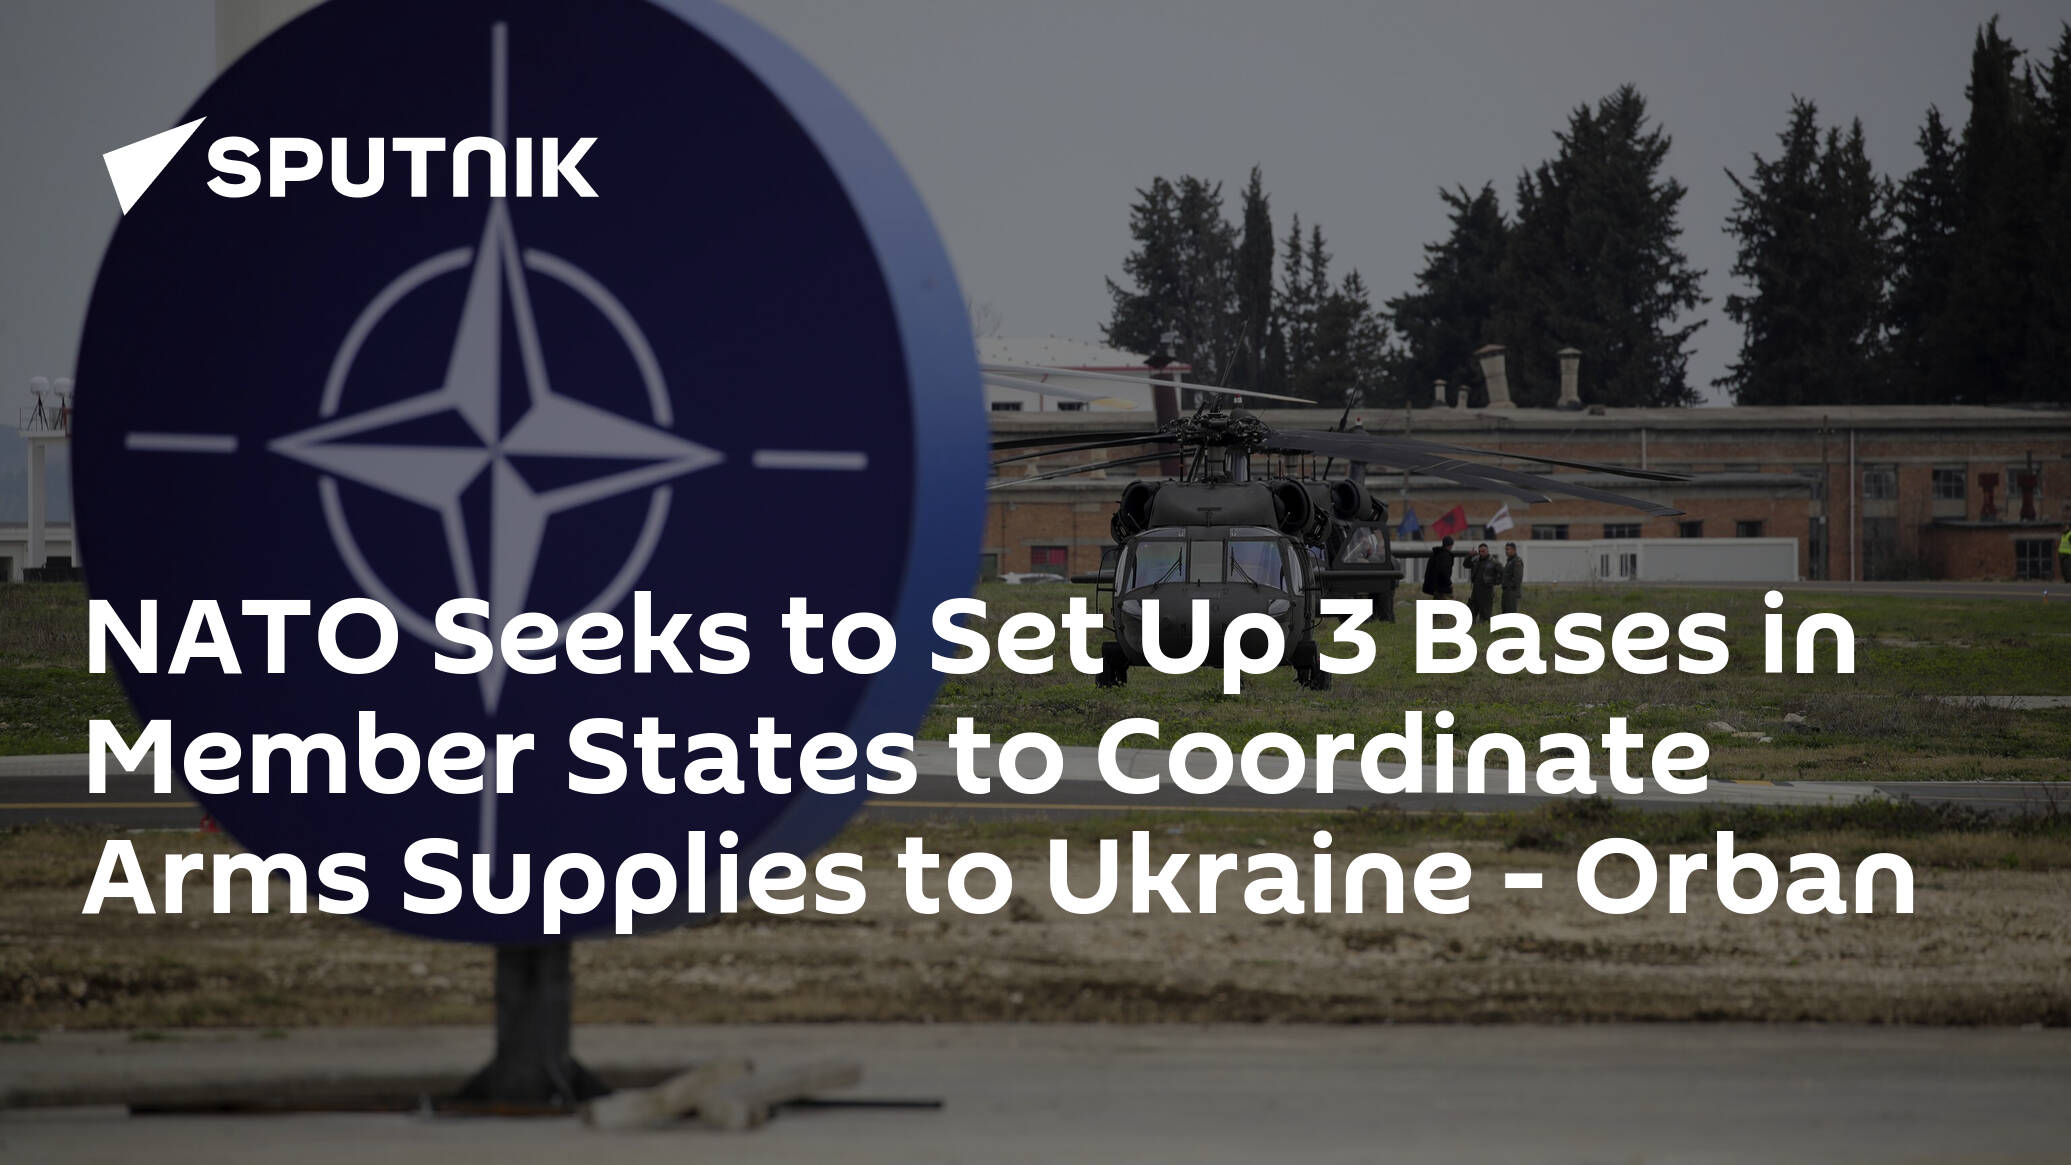 NATO Seeks to Set Up 3 Bases in Member States to Coordinate Arms Supplies to Ukraine - Orban